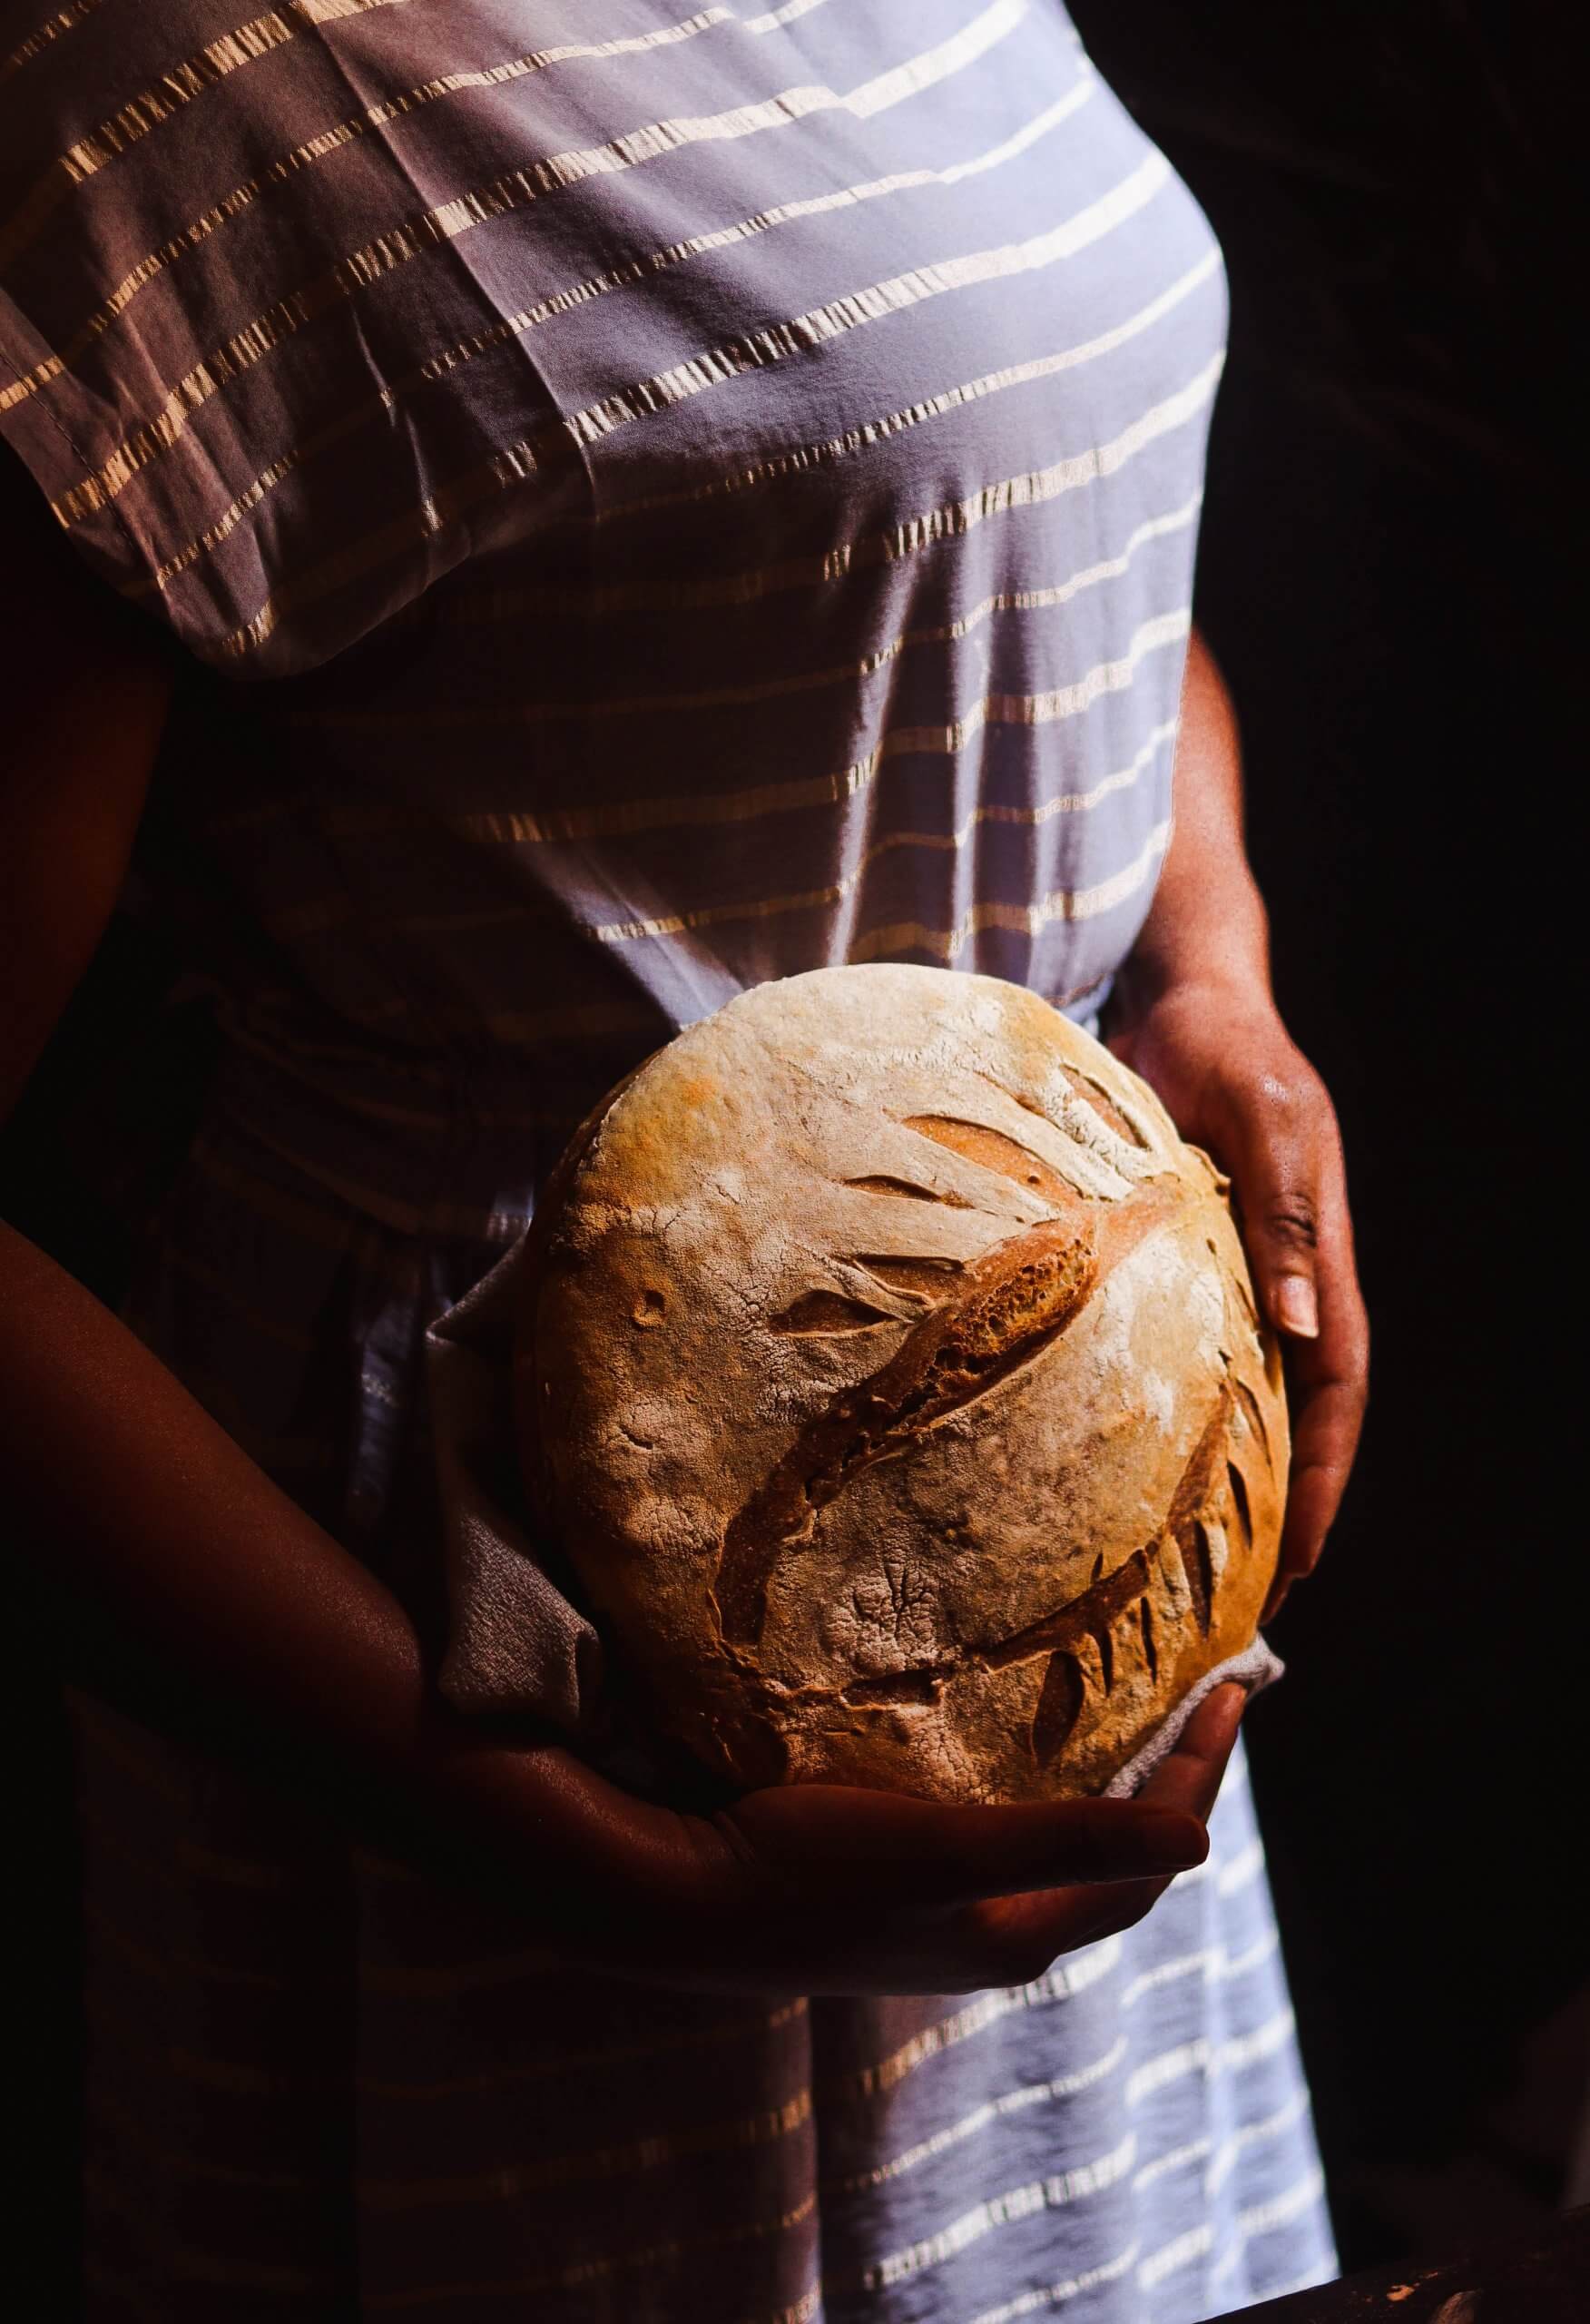 How to Make Your Own Sourdough Bread Starter at Home